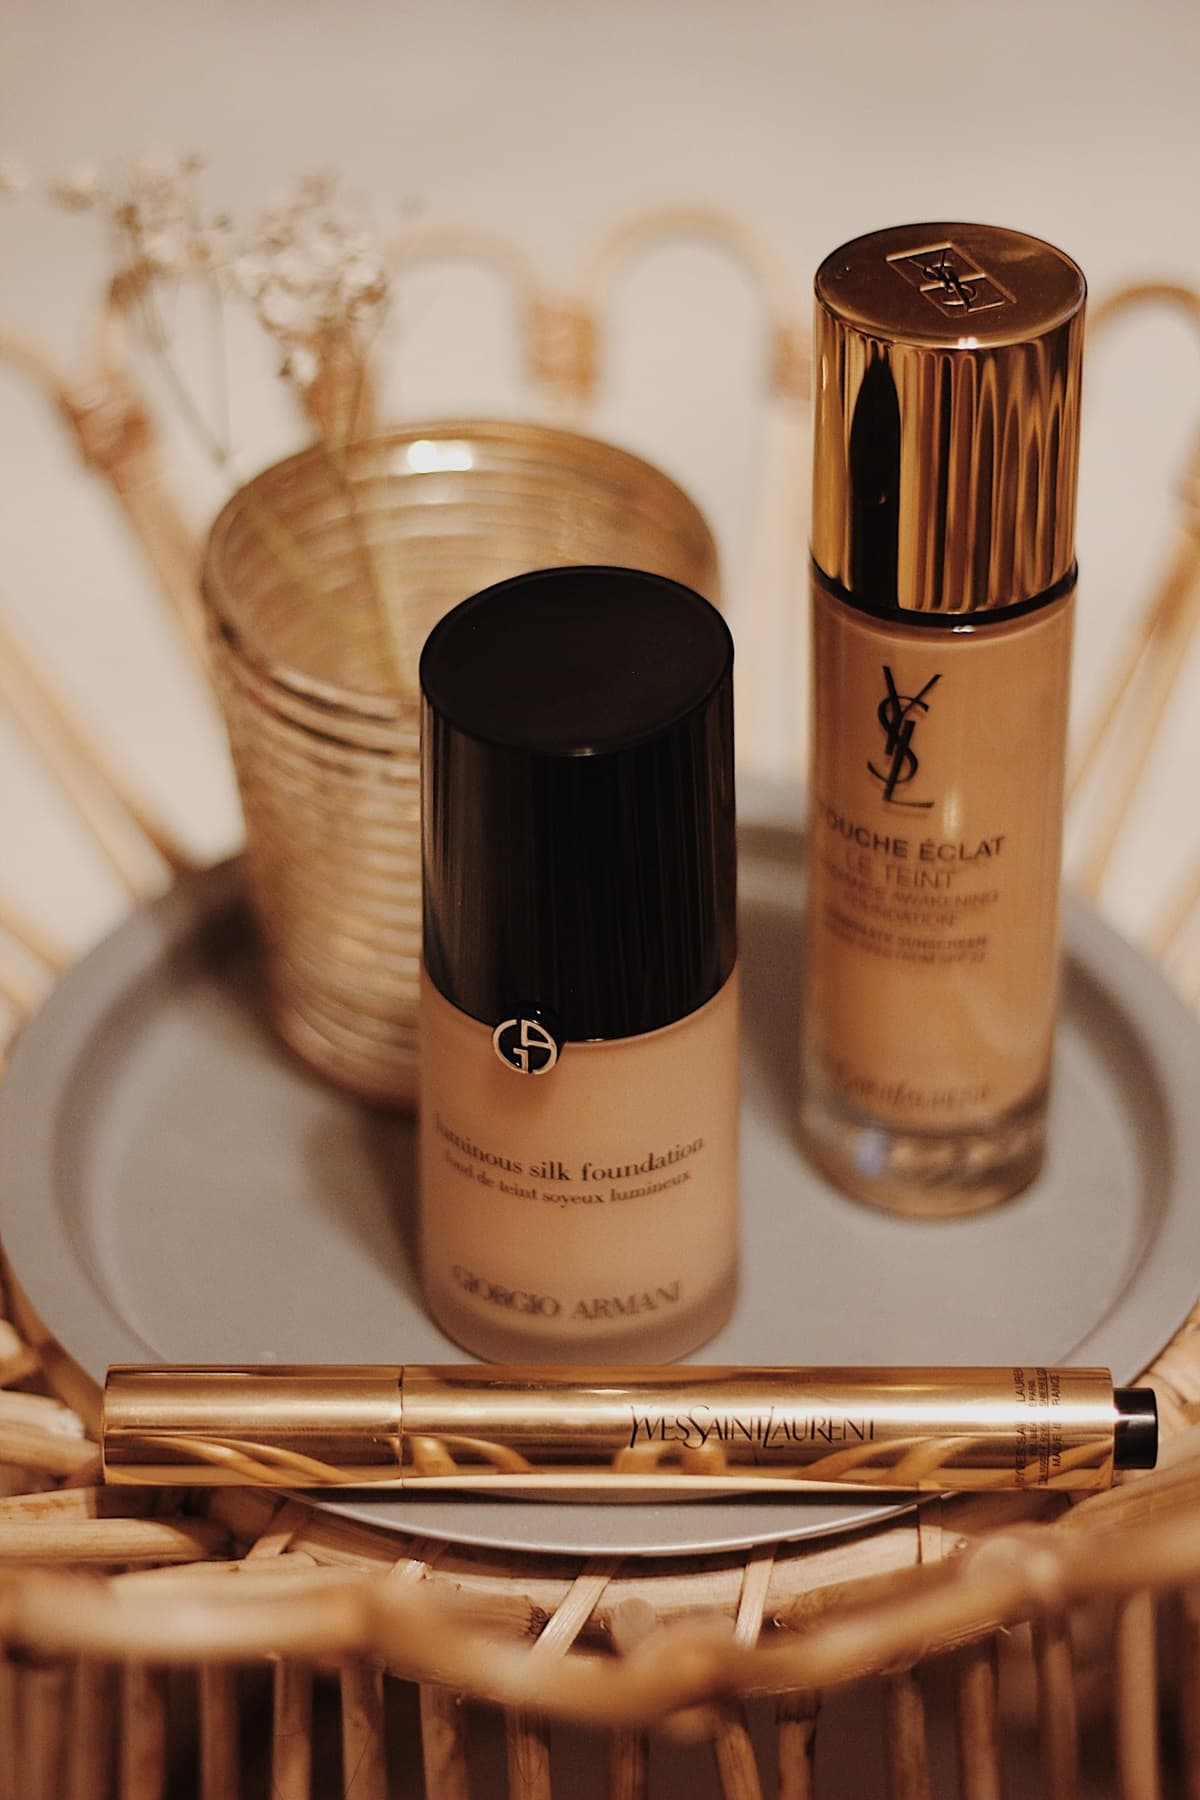 YSL Beauty Products